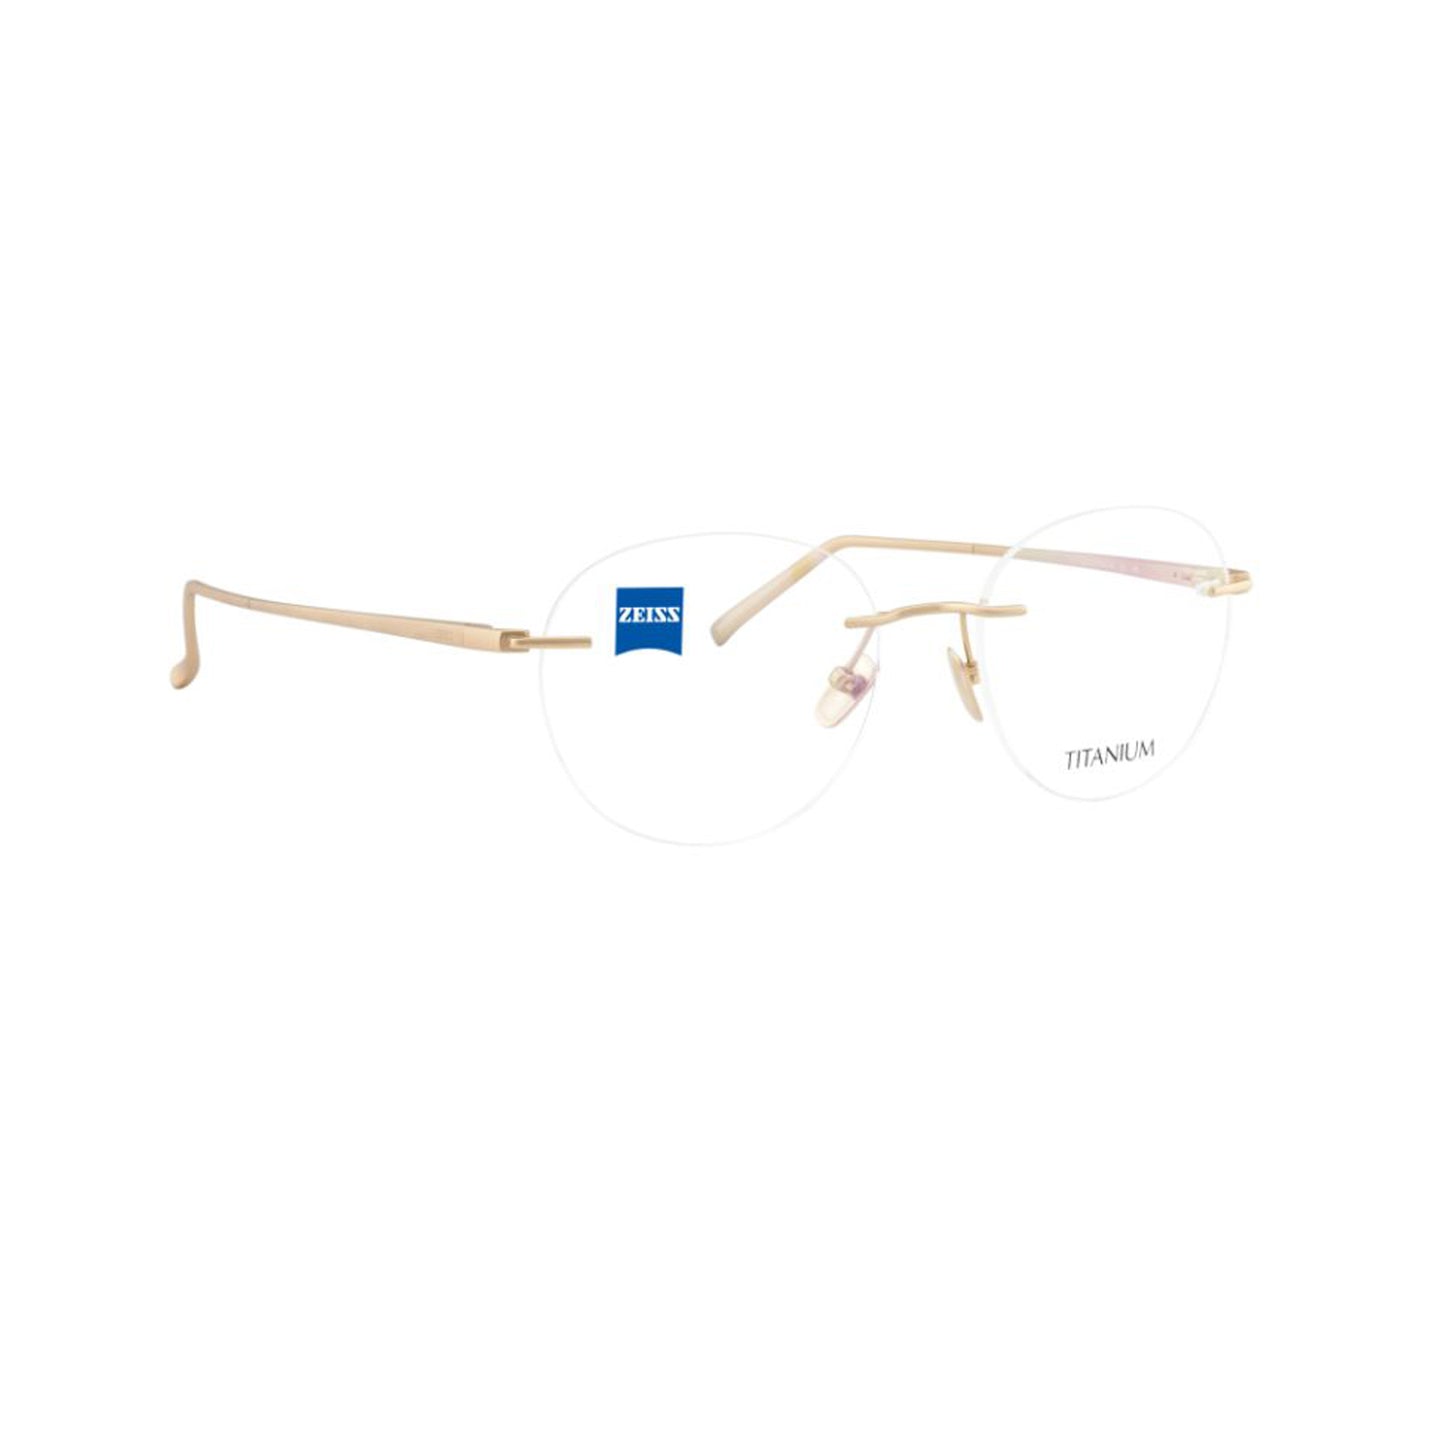 Zeiss Eyewear Gold Round Metal Rimless Eyeglasses. Made in Germany ZS60001-Y22